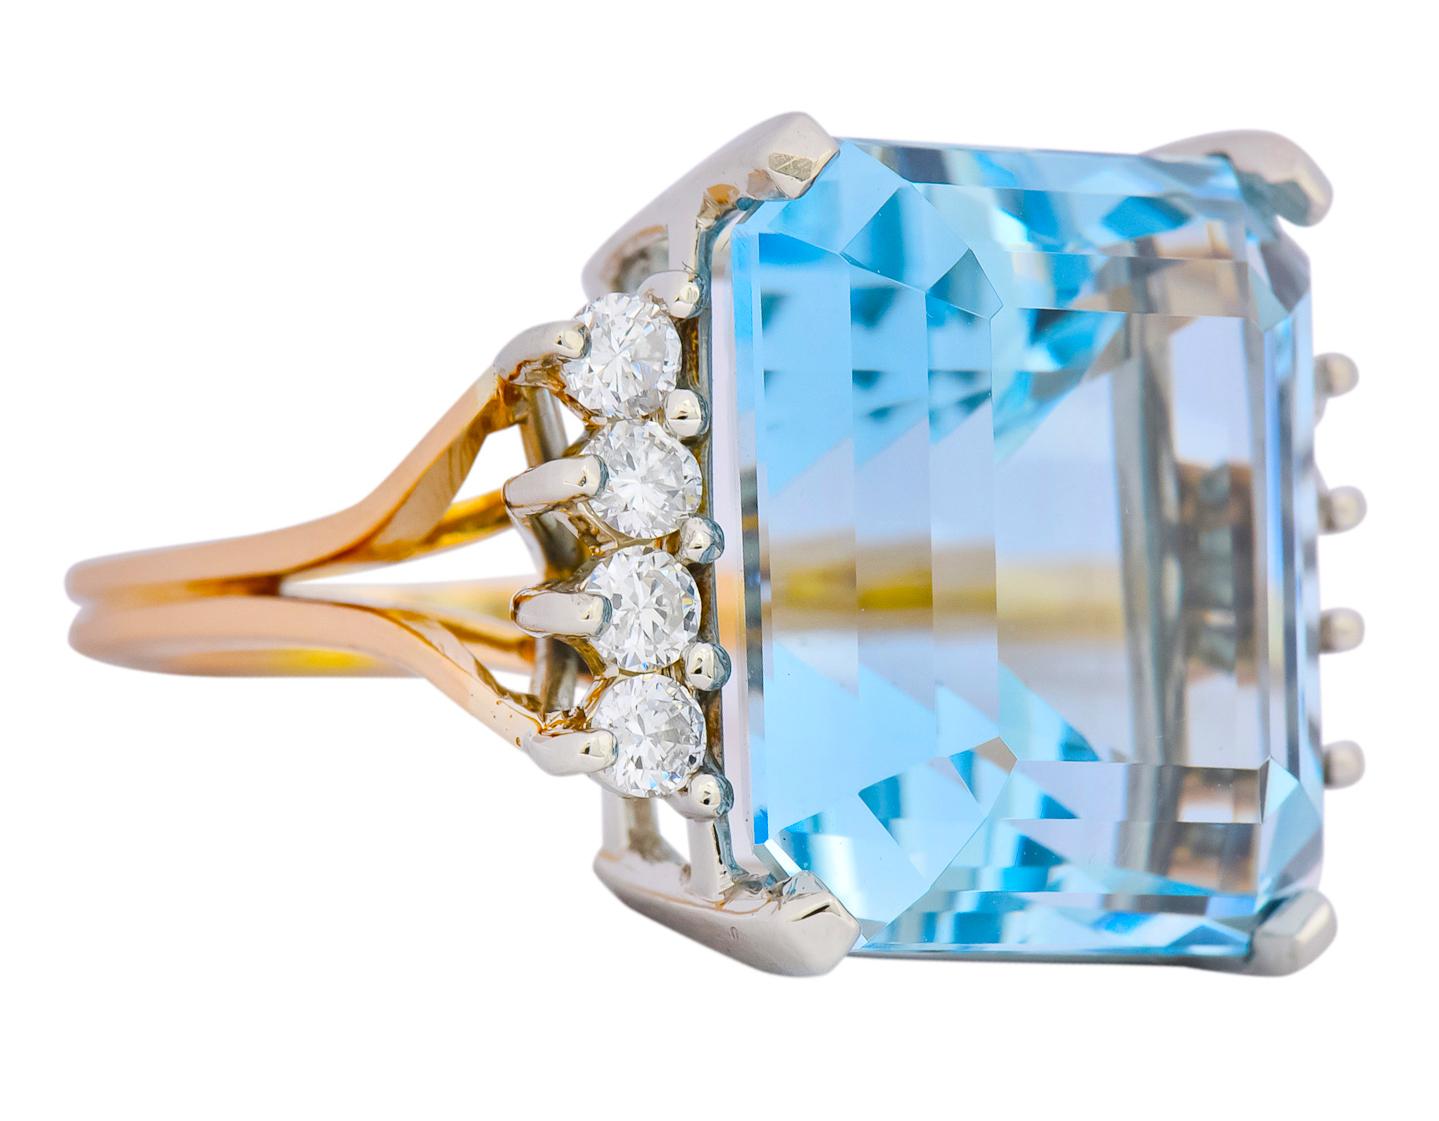 Centering an emerald cut aquamarine, basket set in white gold, weighing approximately 16.46 carats total, transparent and sky blue in color

Flanked by rows of round brilliant cut diamonds, prong set north to south, weighing approximately 0.32 carat